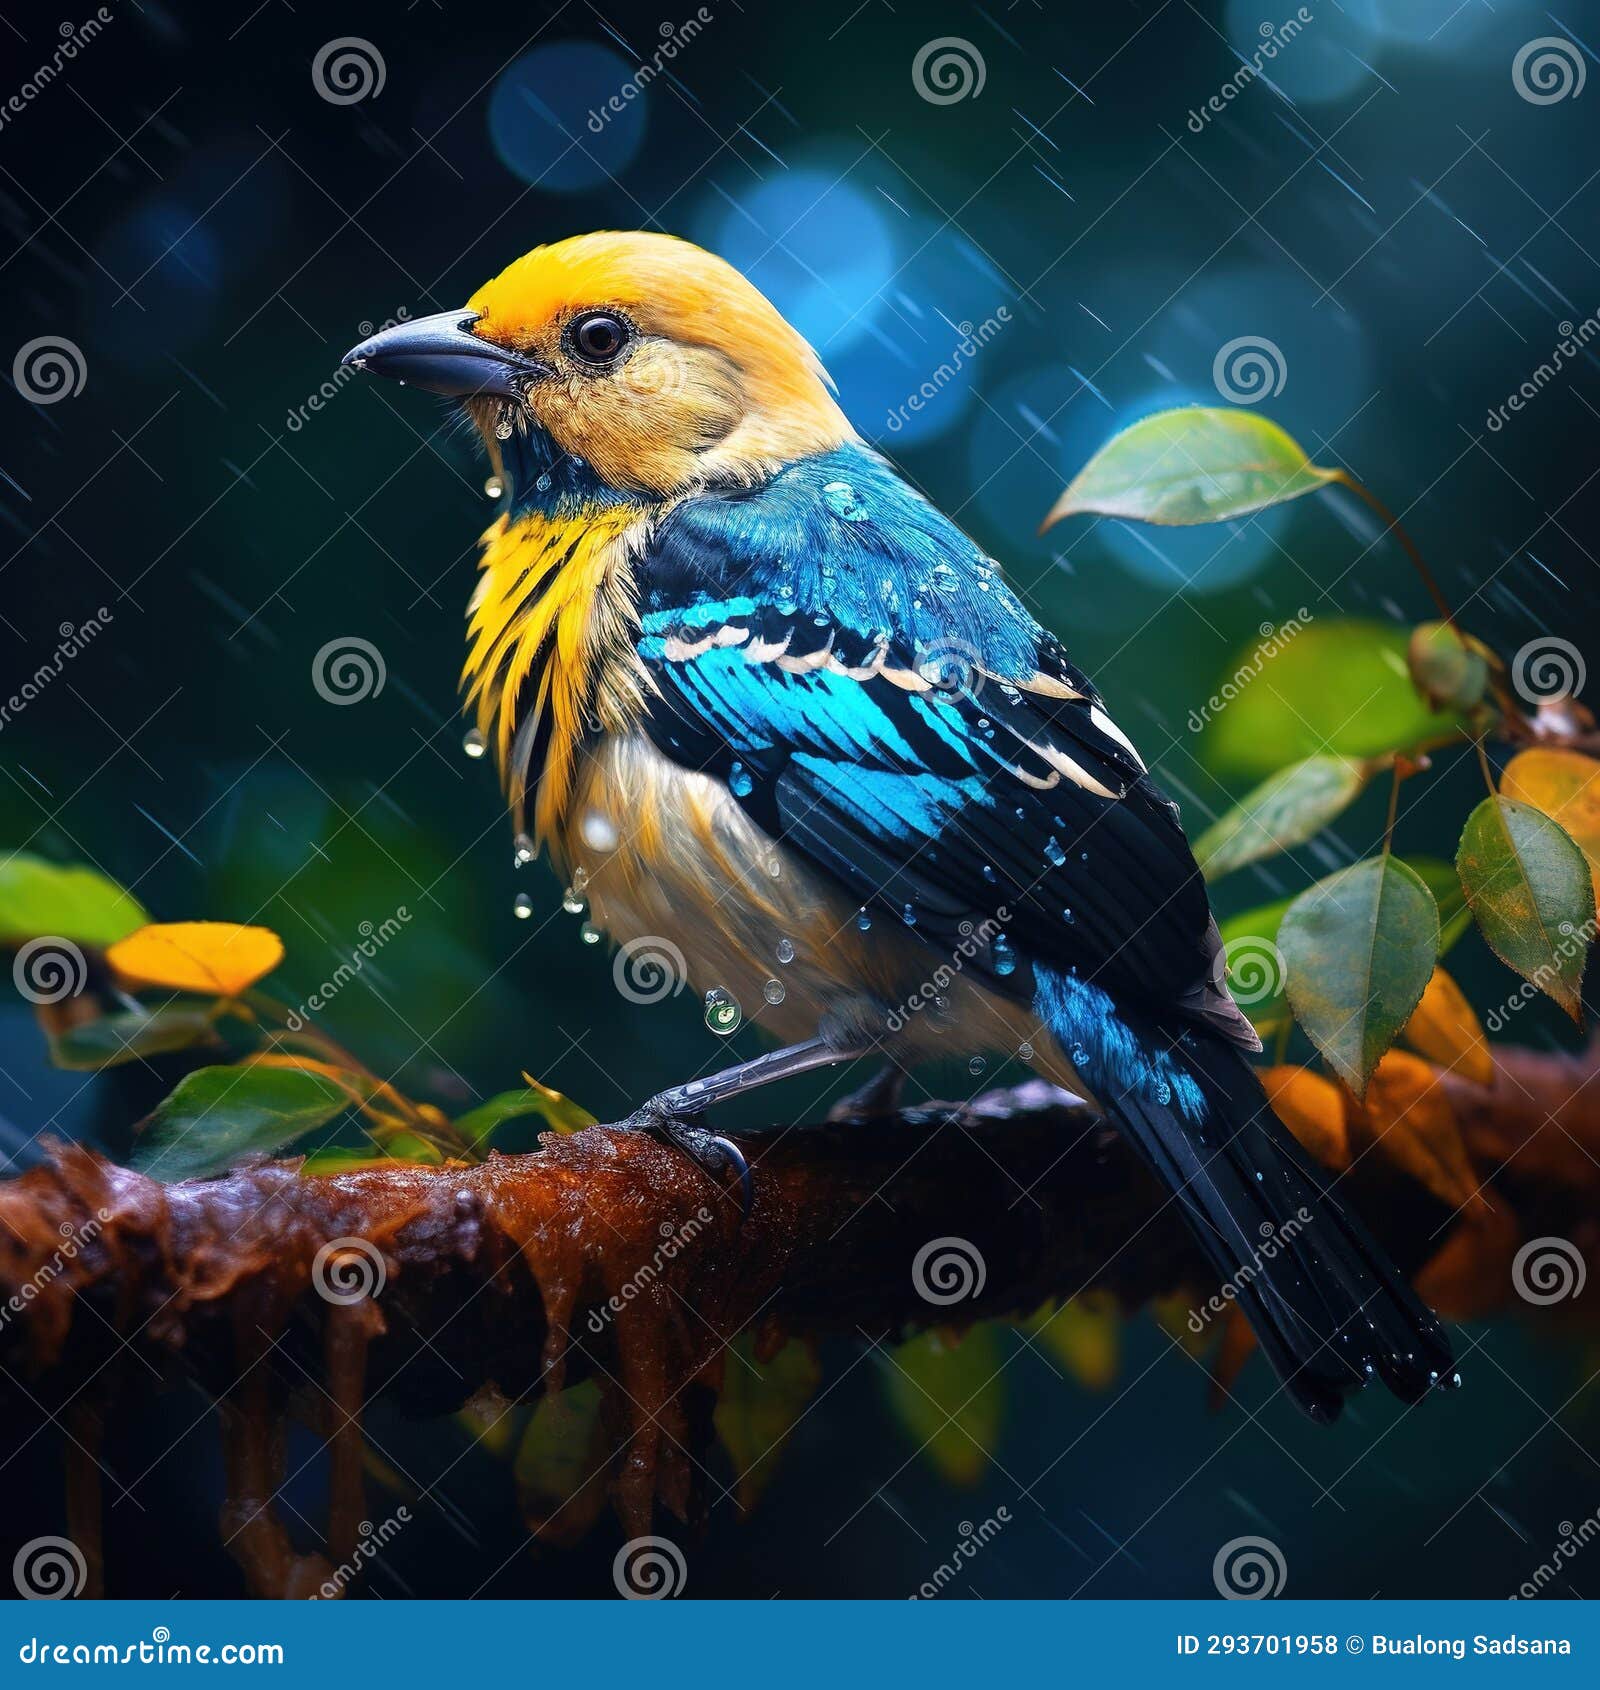 golden-hooded tanager tangara larvata exotic tropical blue bird with gold head from costa rica. wildlife scene from nature